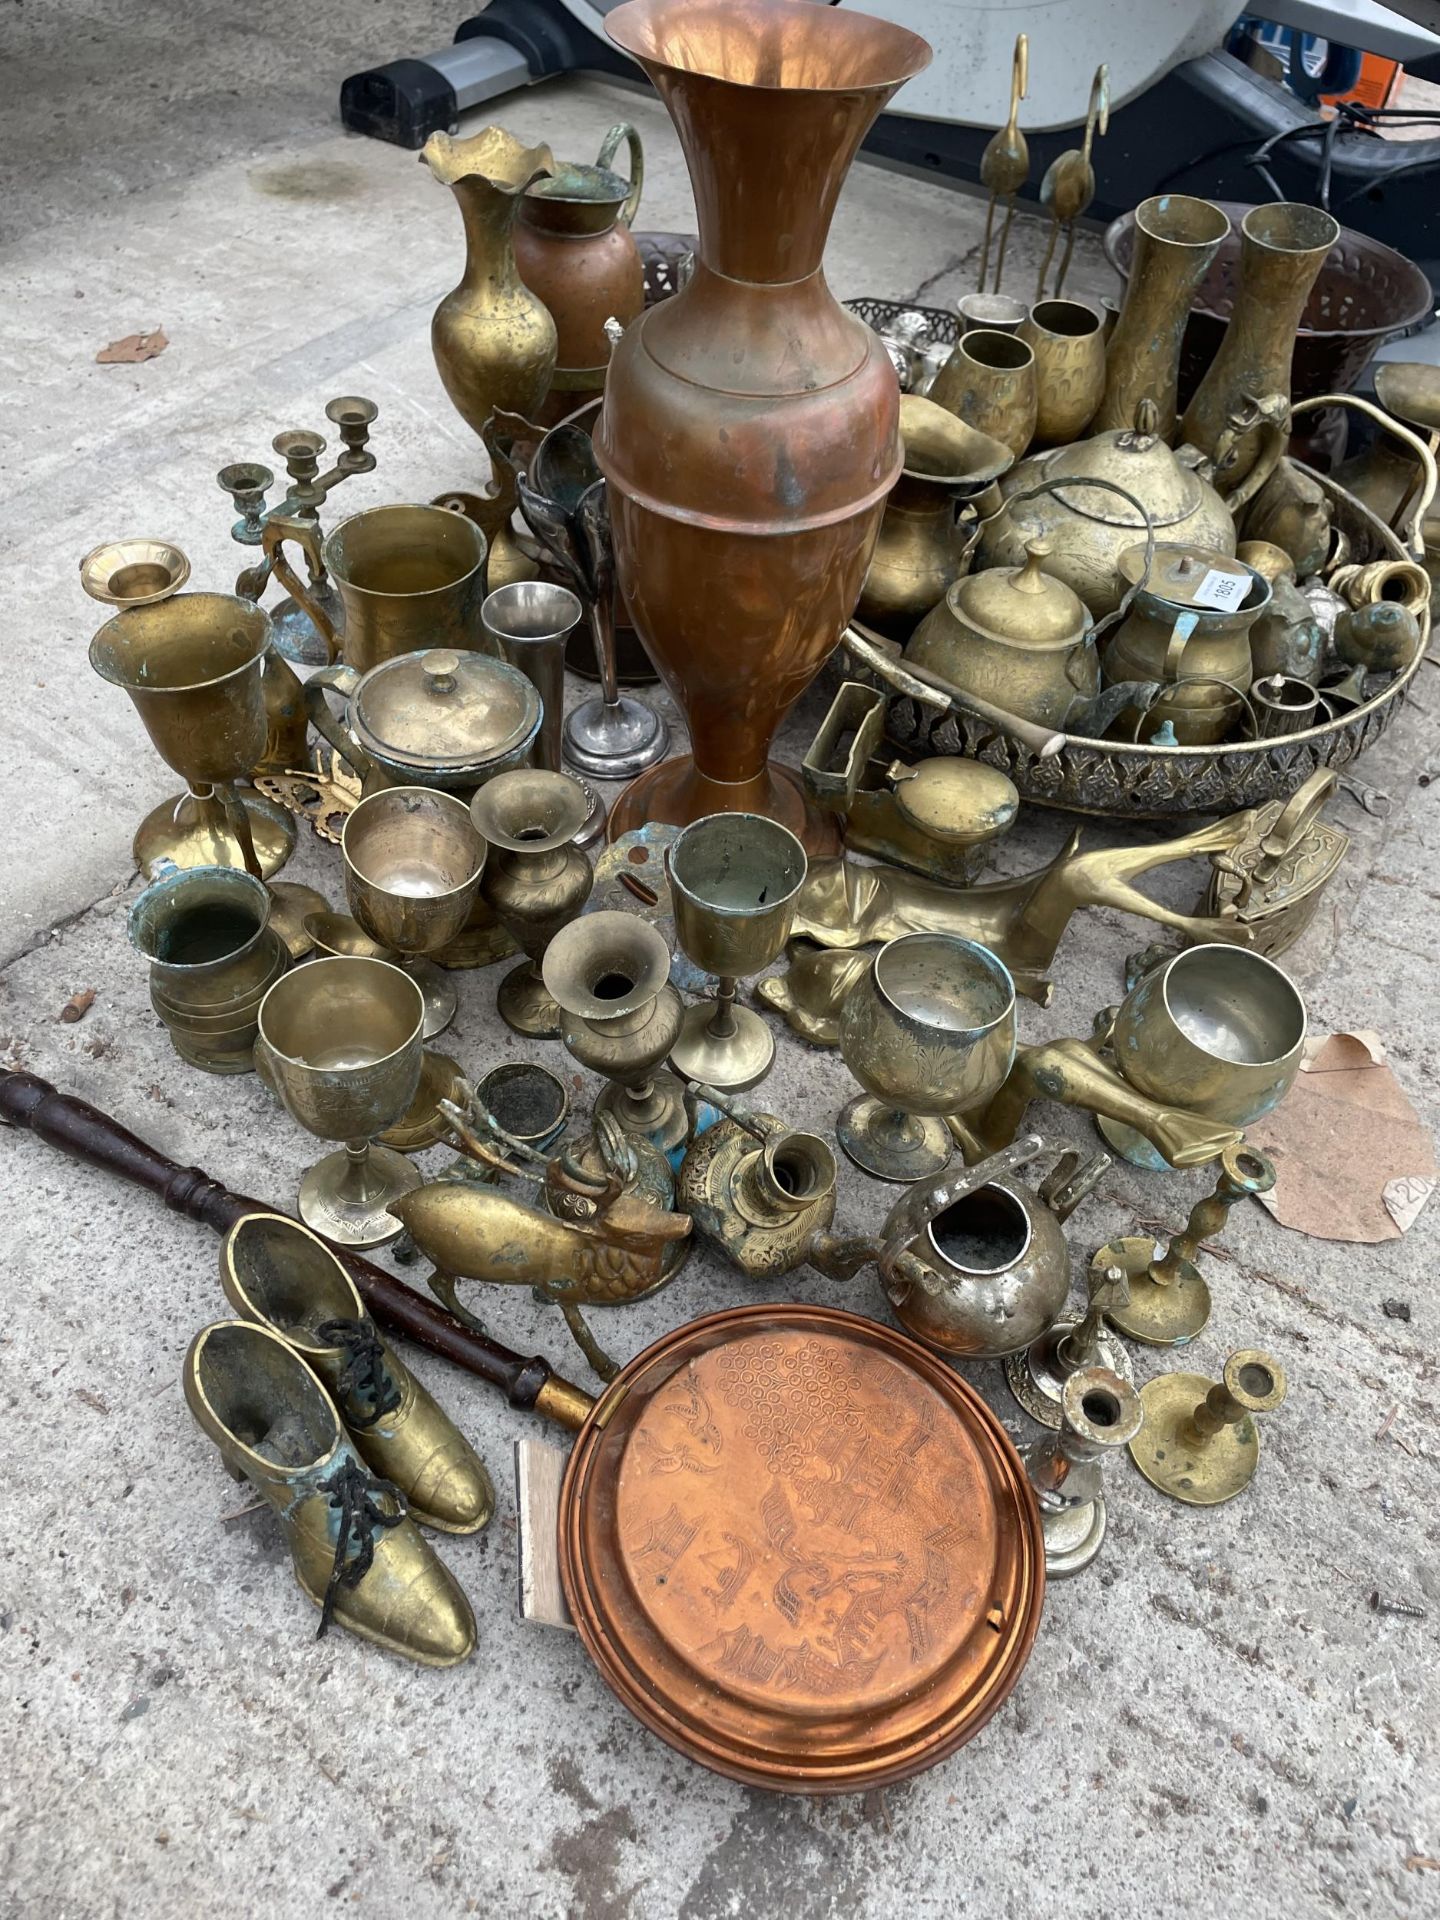 A LARGE ASSORTMENT OF METAL WARE ITEMS TO INCLUDE A COPPER VASE, BRASS GOBLETS AND BRASS FIGURES ETC - Image 2 of 6